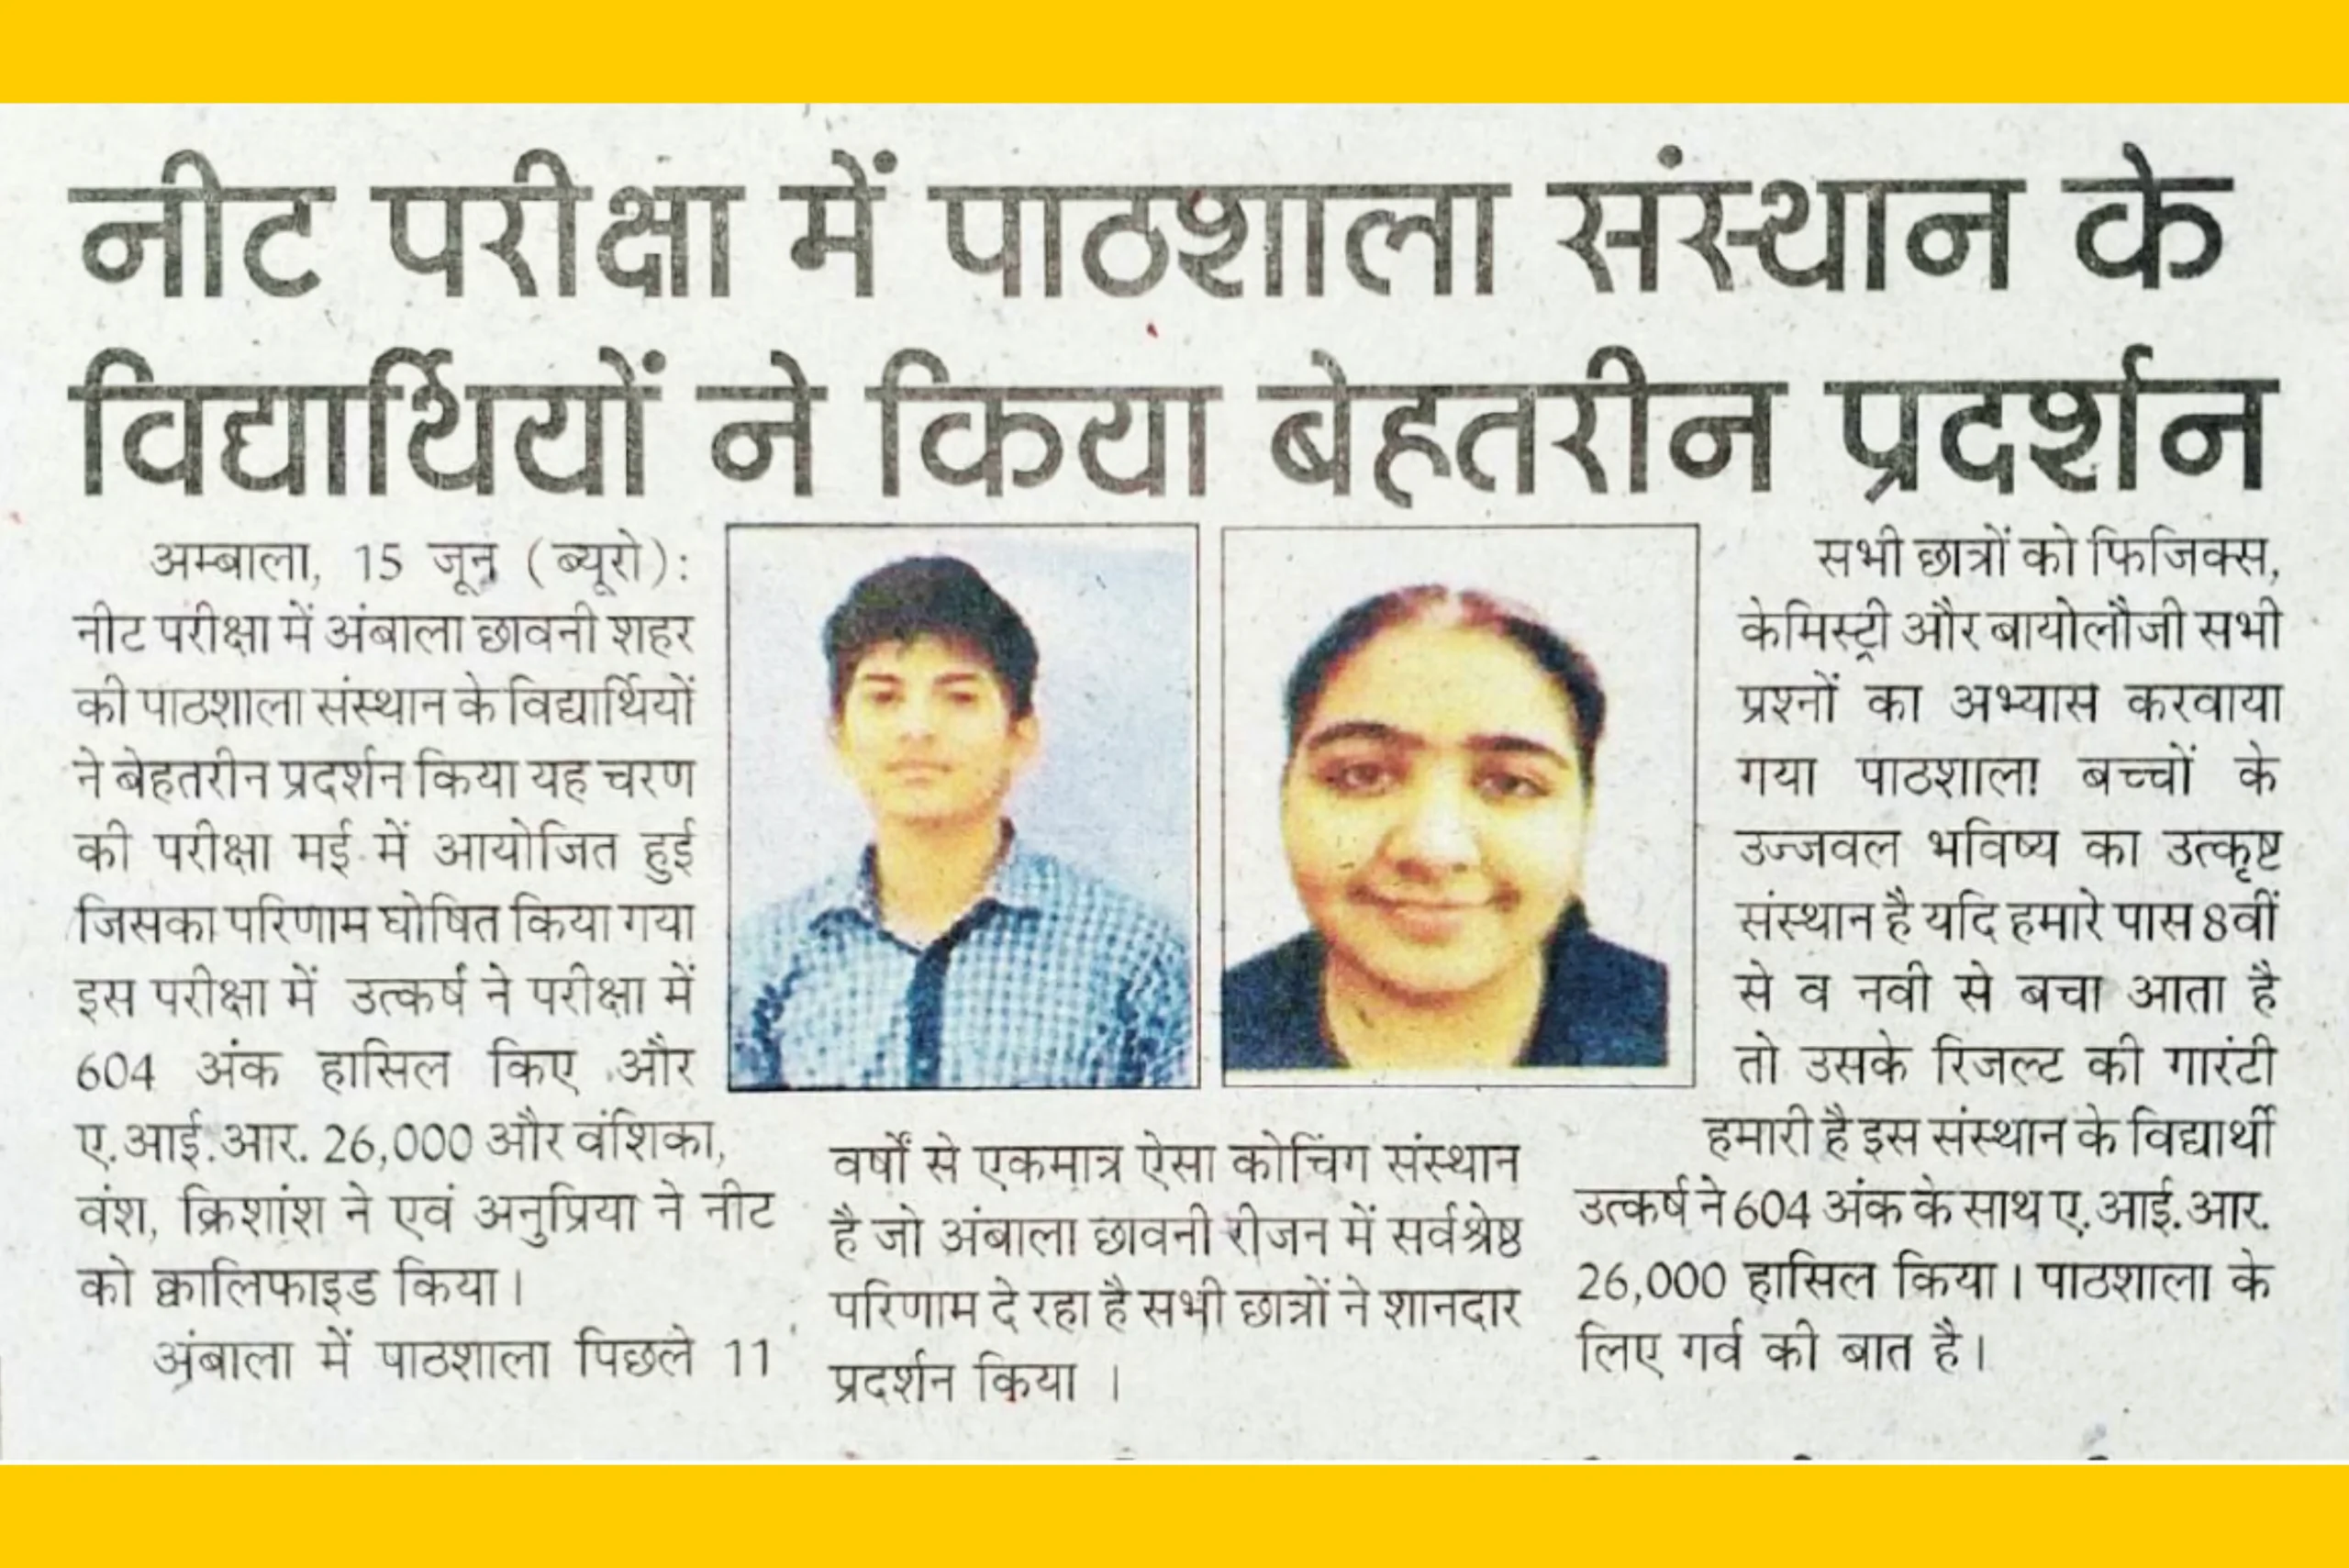 Paathshala Coaching NEET results featured in newspaper